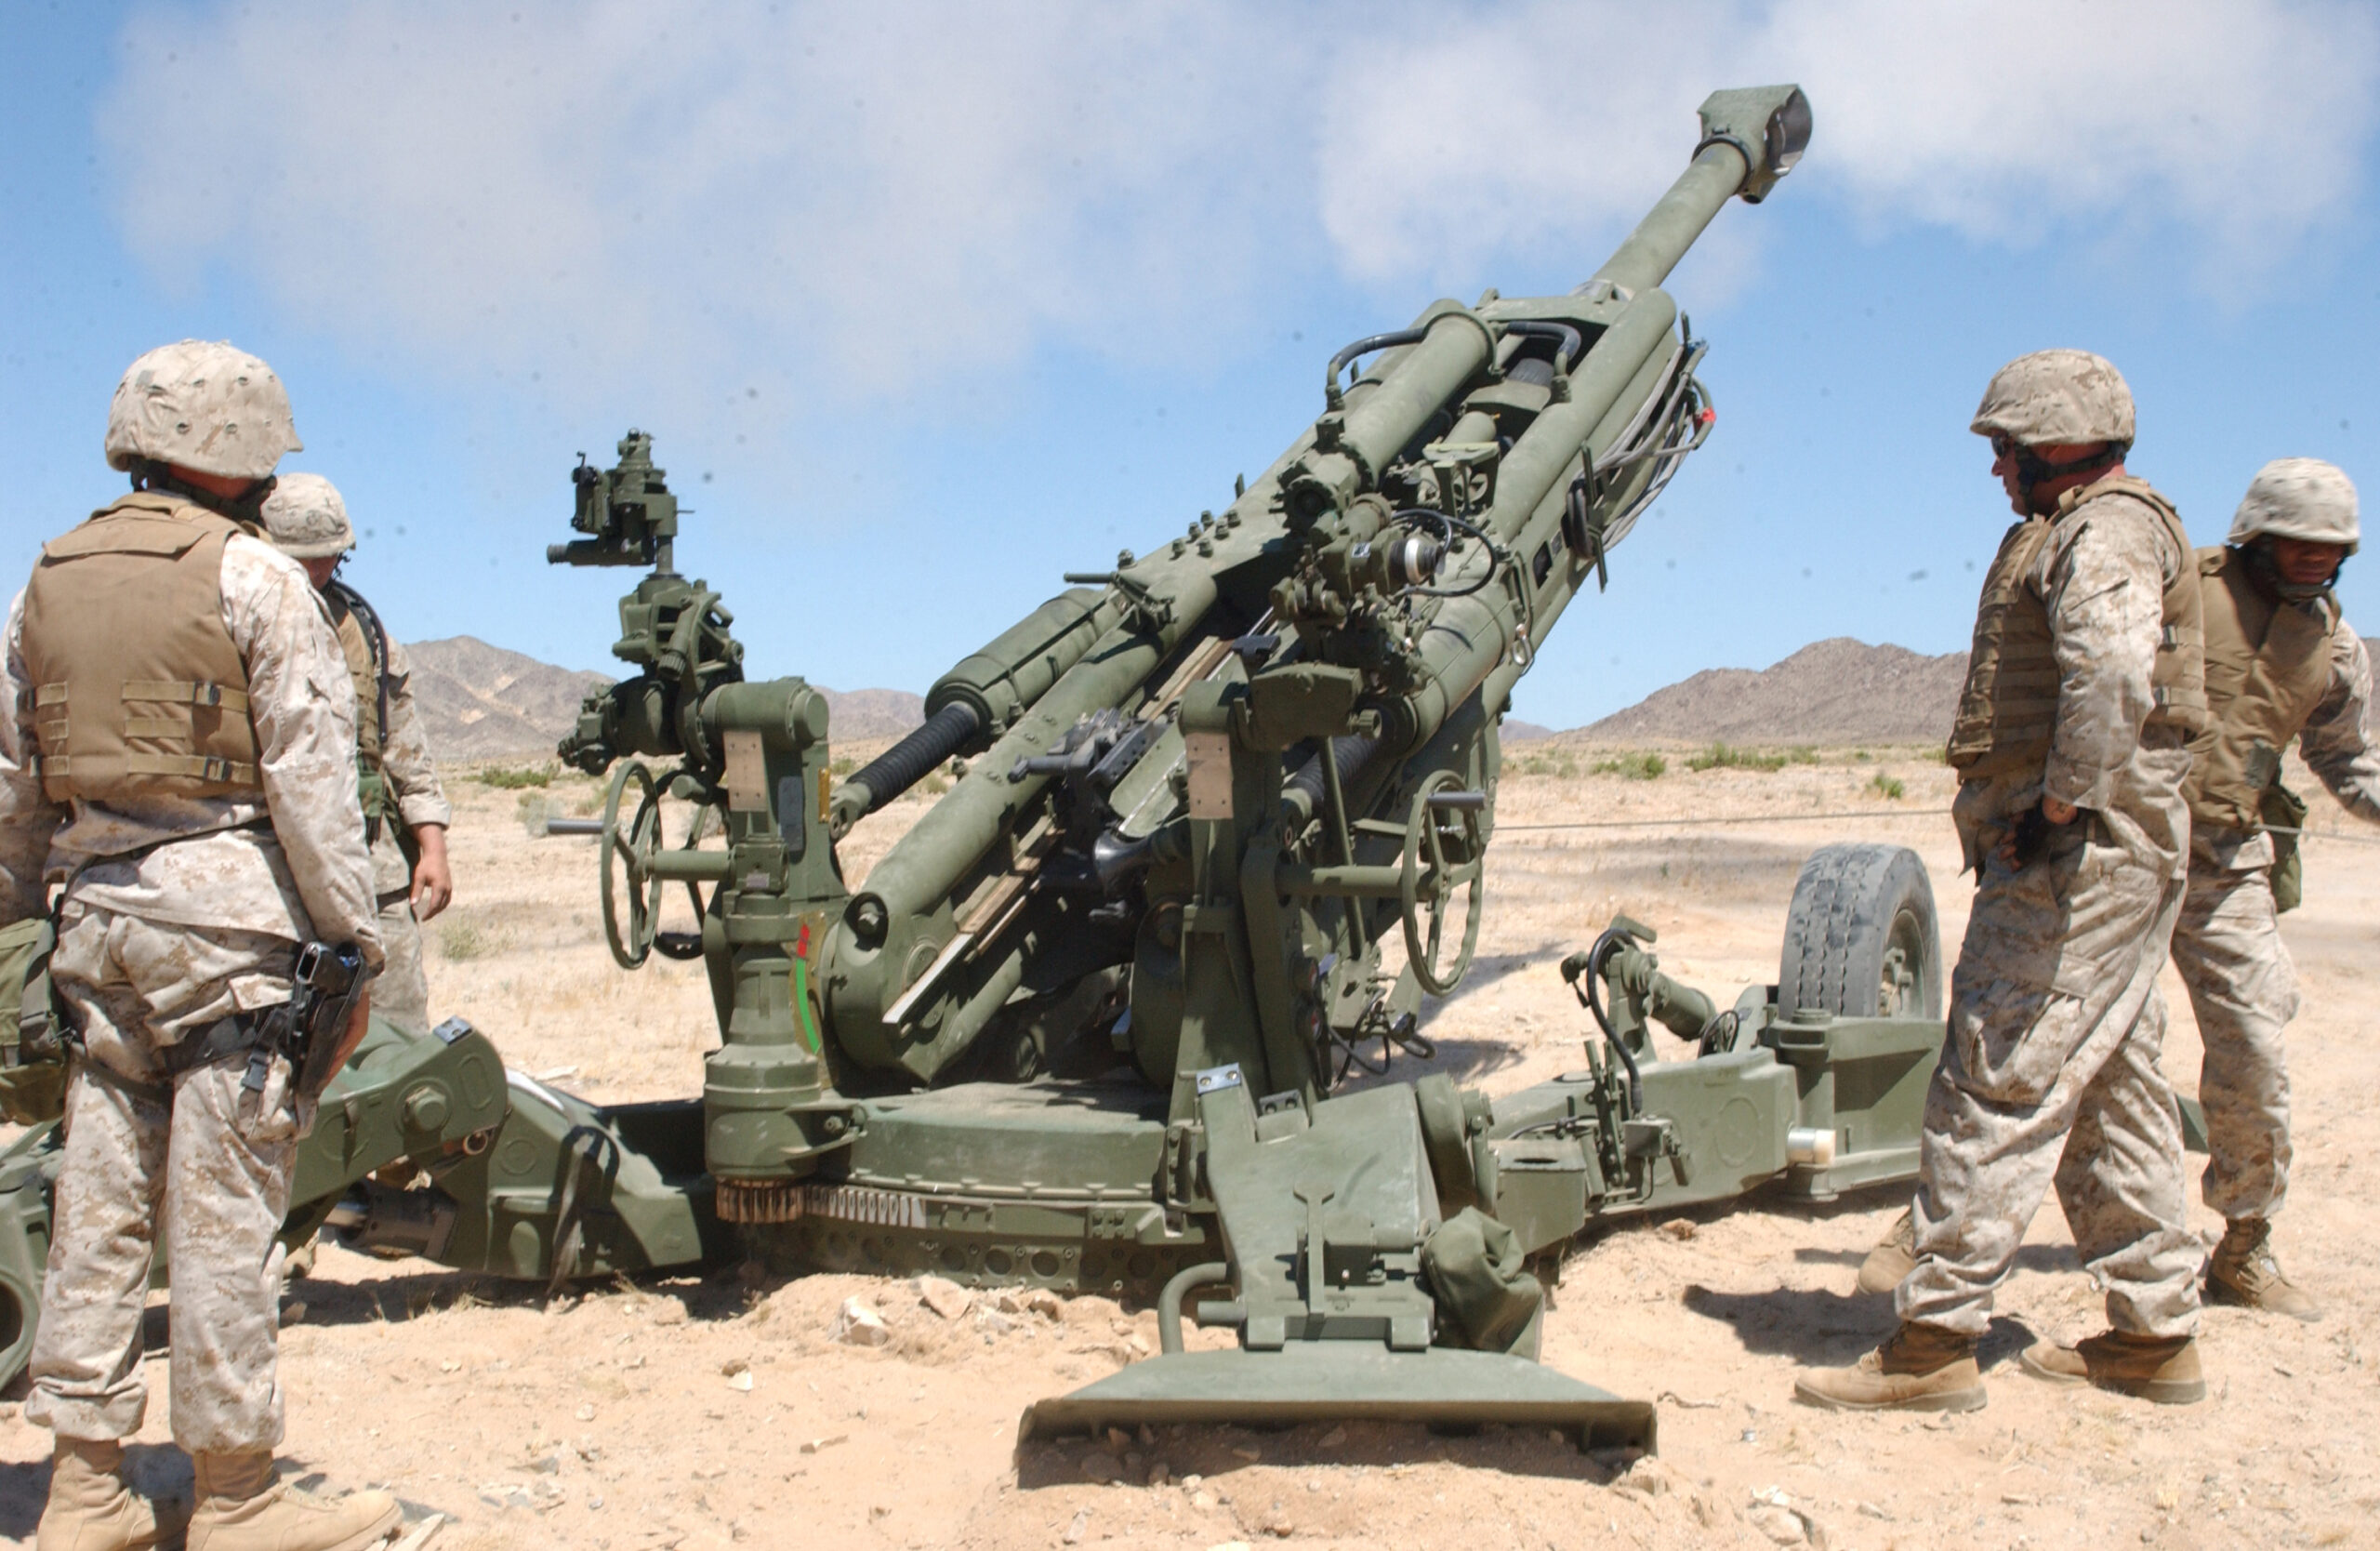 M777 howitzer rear scaled